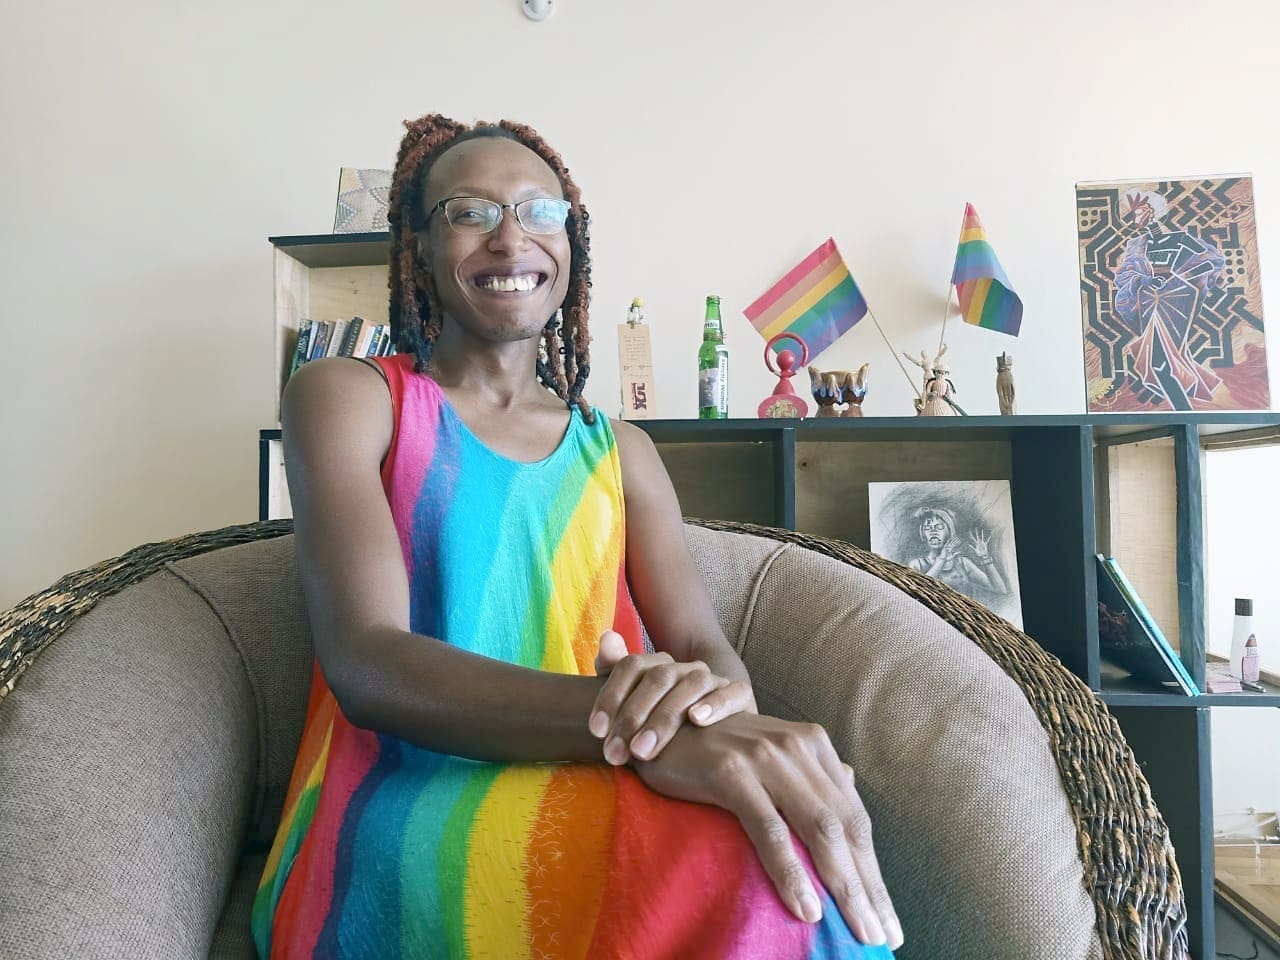 Arya Jeipea Karijo wears a rainbow dress in her living room while sitting with her arms crossed.